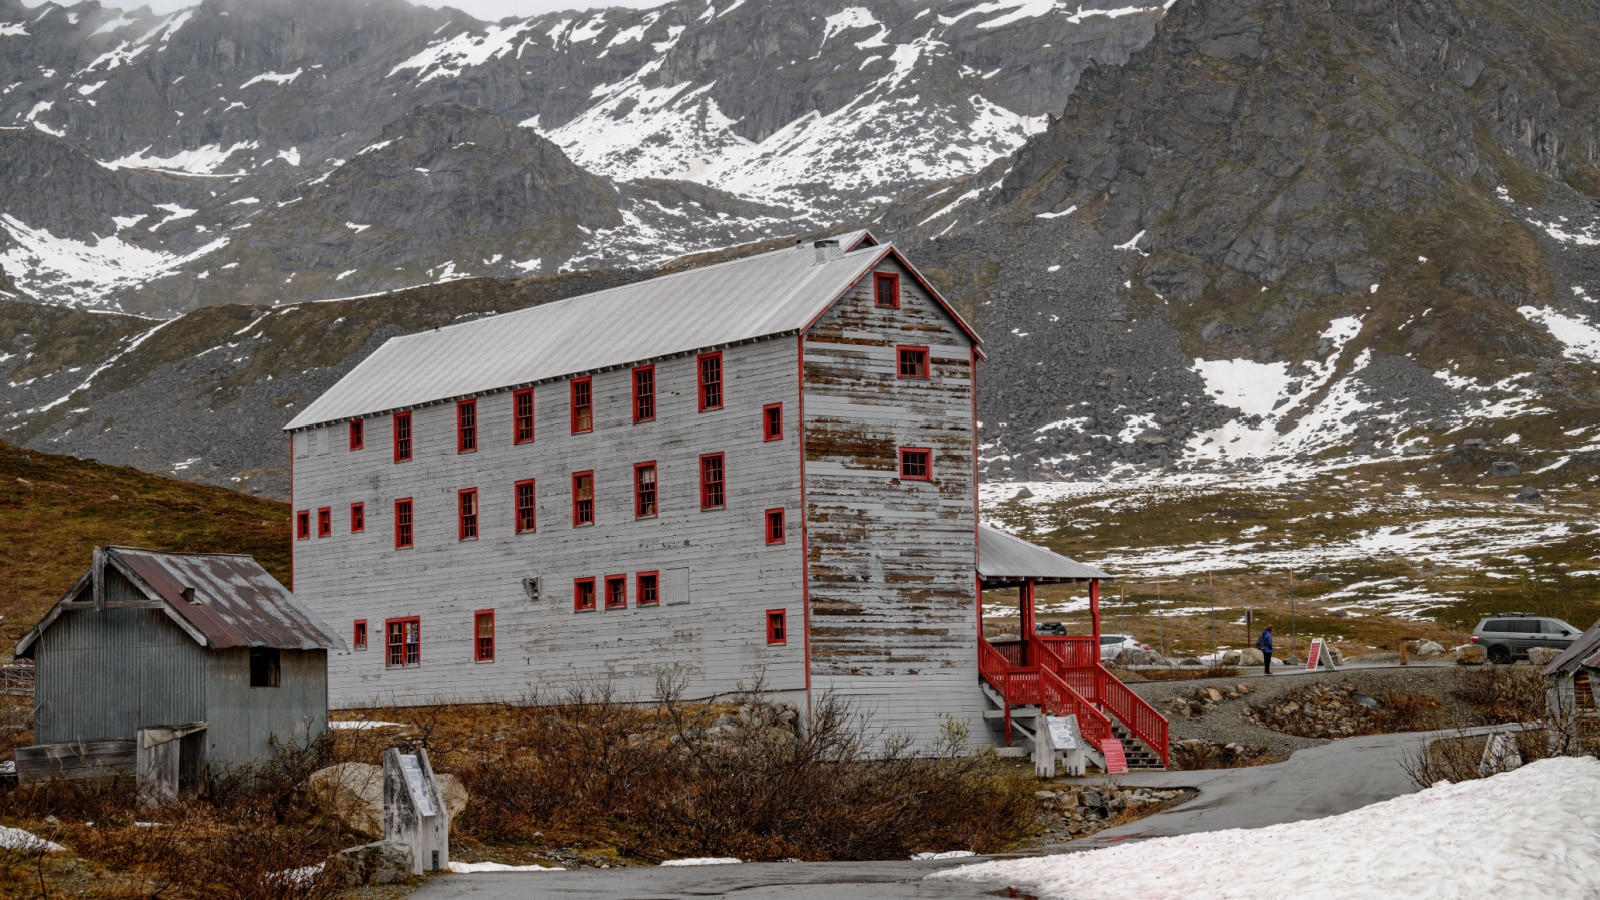 Hatcher Pass. In its heyday, the Independence Mine at Hatcher Pass was a hive of activity. In 1941, two hundred and four people worked at the gold mine, and 22 families, including eight school-age chi